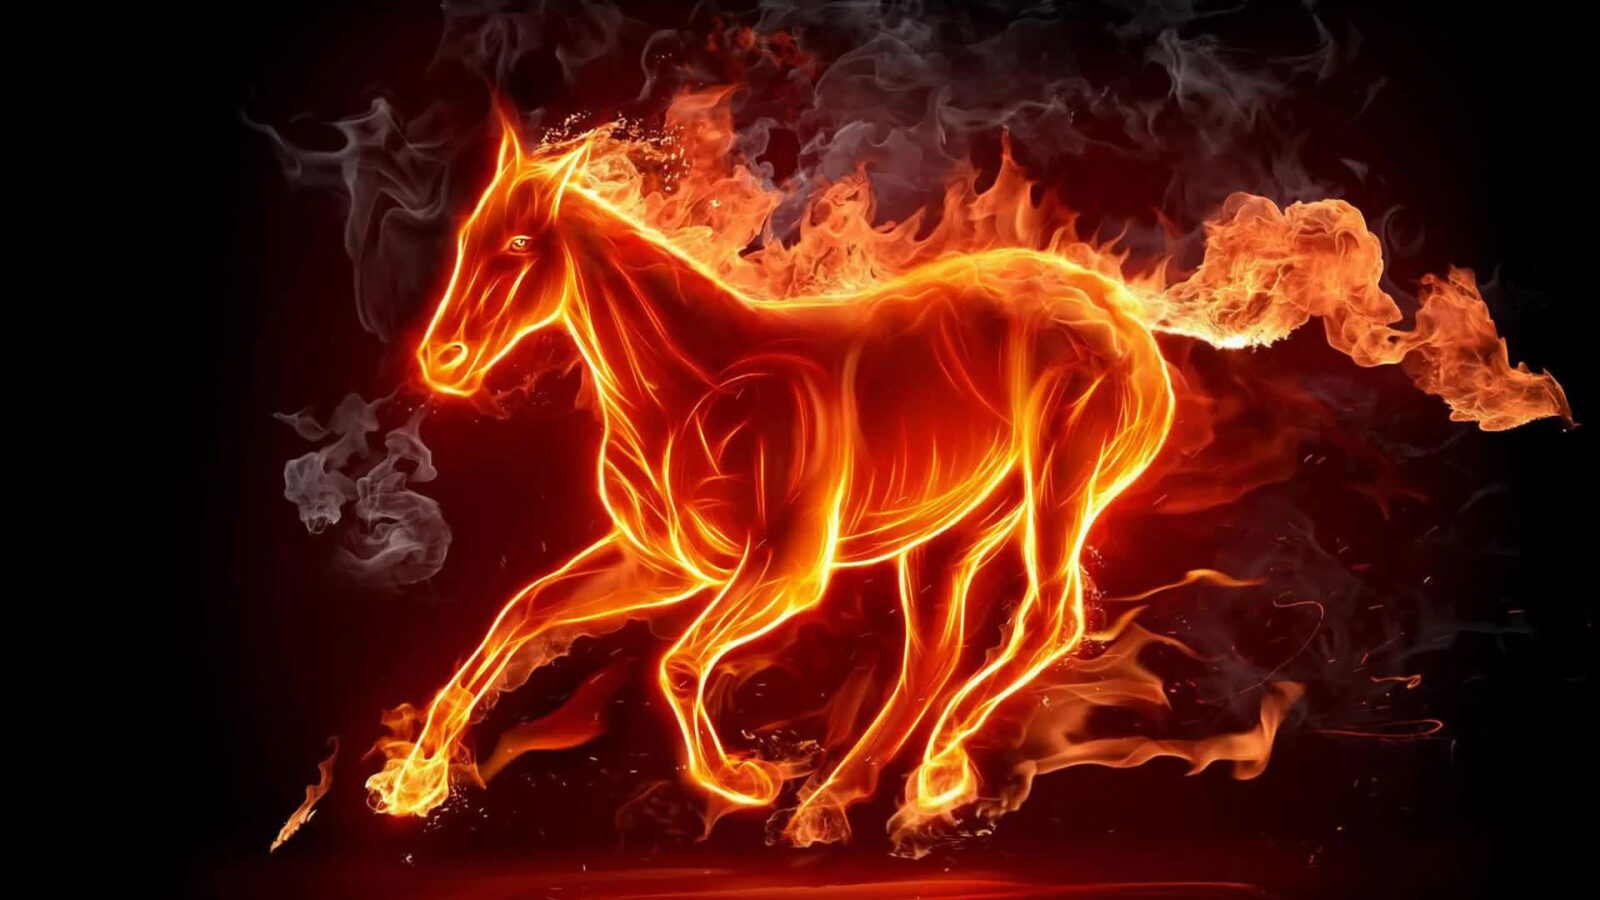 LiveWallpapers4Free.com | Creative Burning Running Fire Horse - Free Live Wallpaper